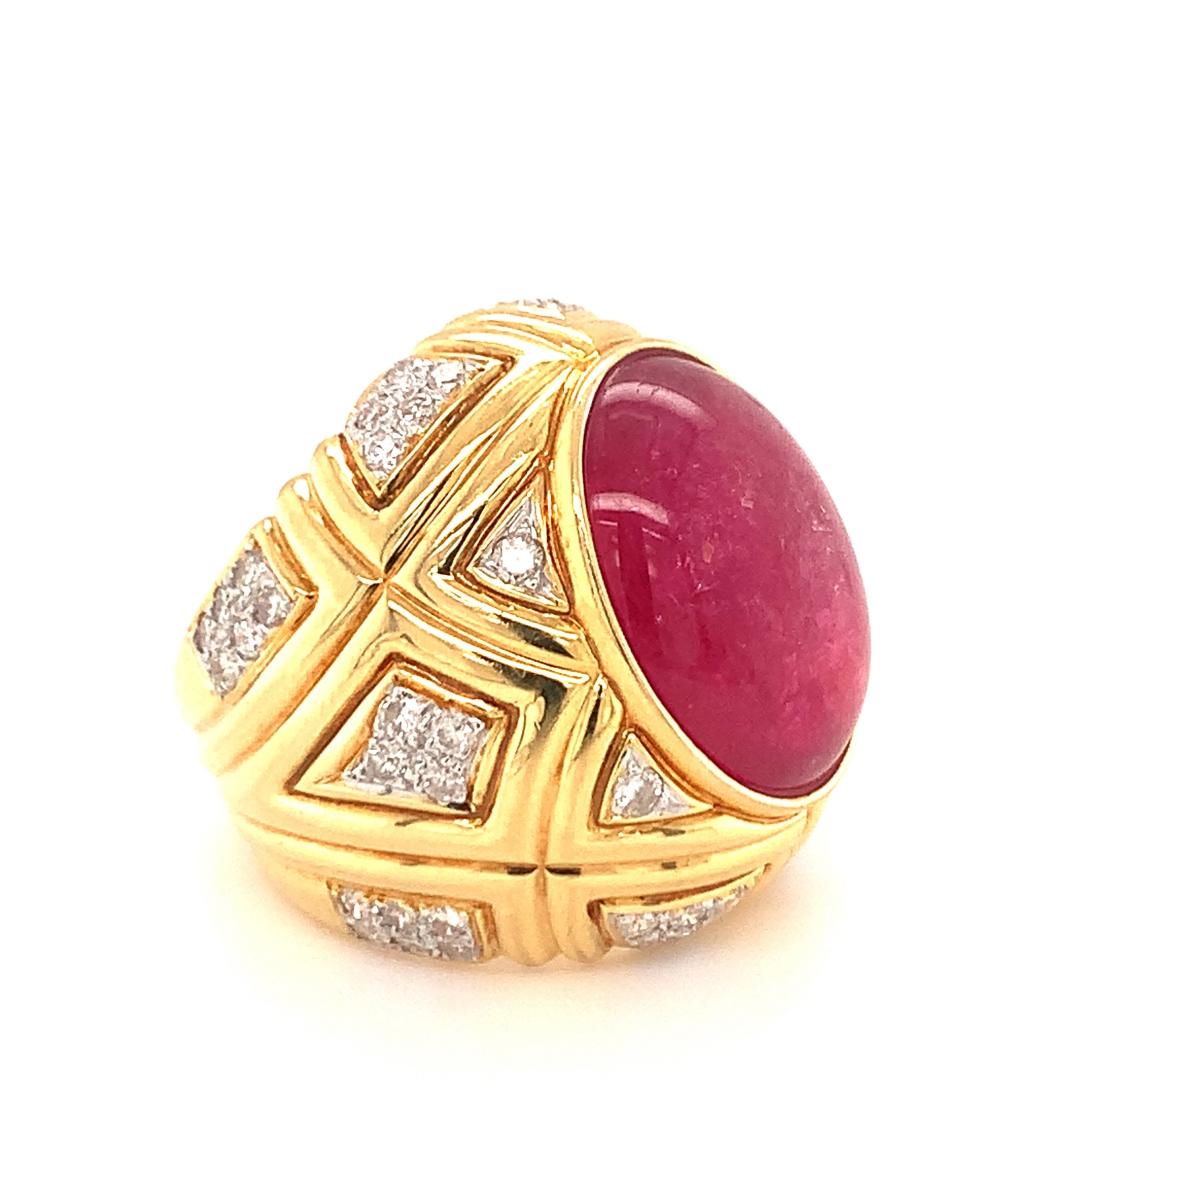 Women's Pink Tourmaline and Diamond 18k Yellow Gold Dome Ring, circa 1970s For Sale